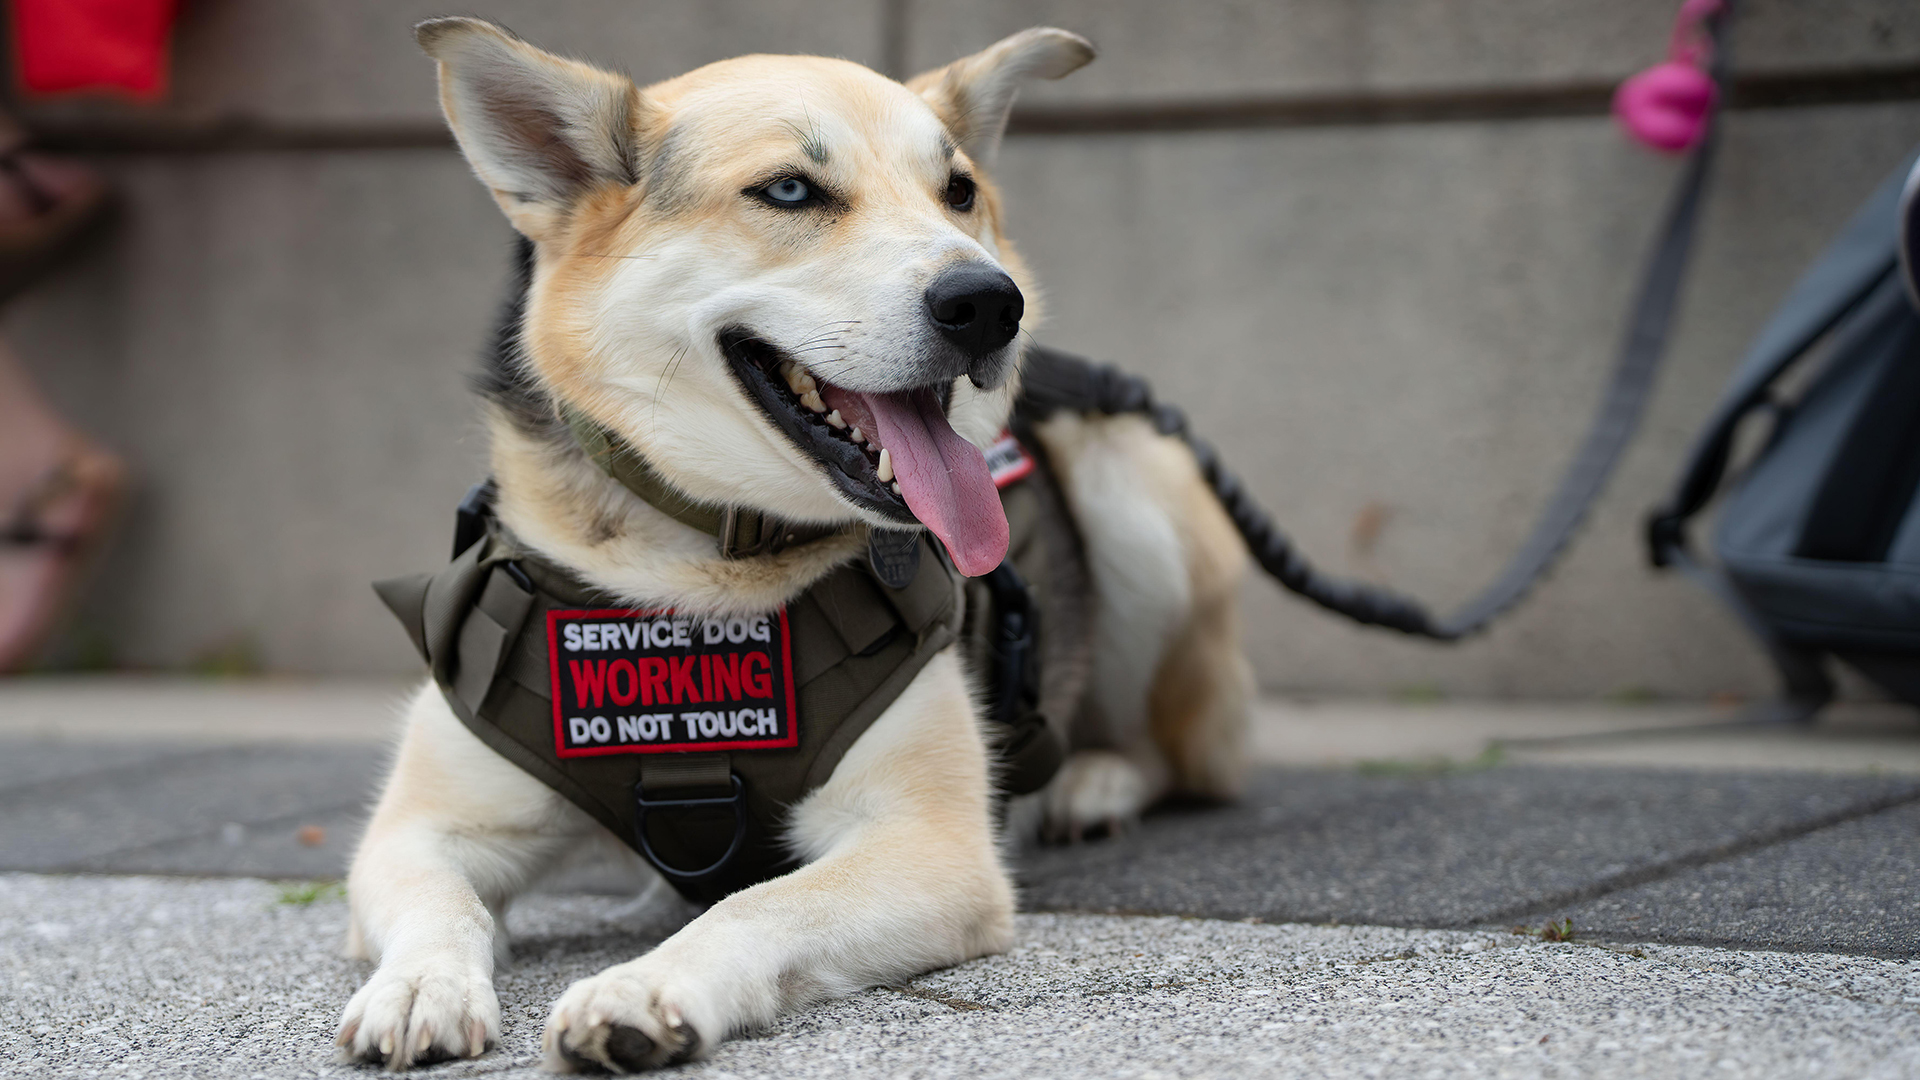 A service dog in-training relaxes at the National War Memorial in Ottawa, Canada.